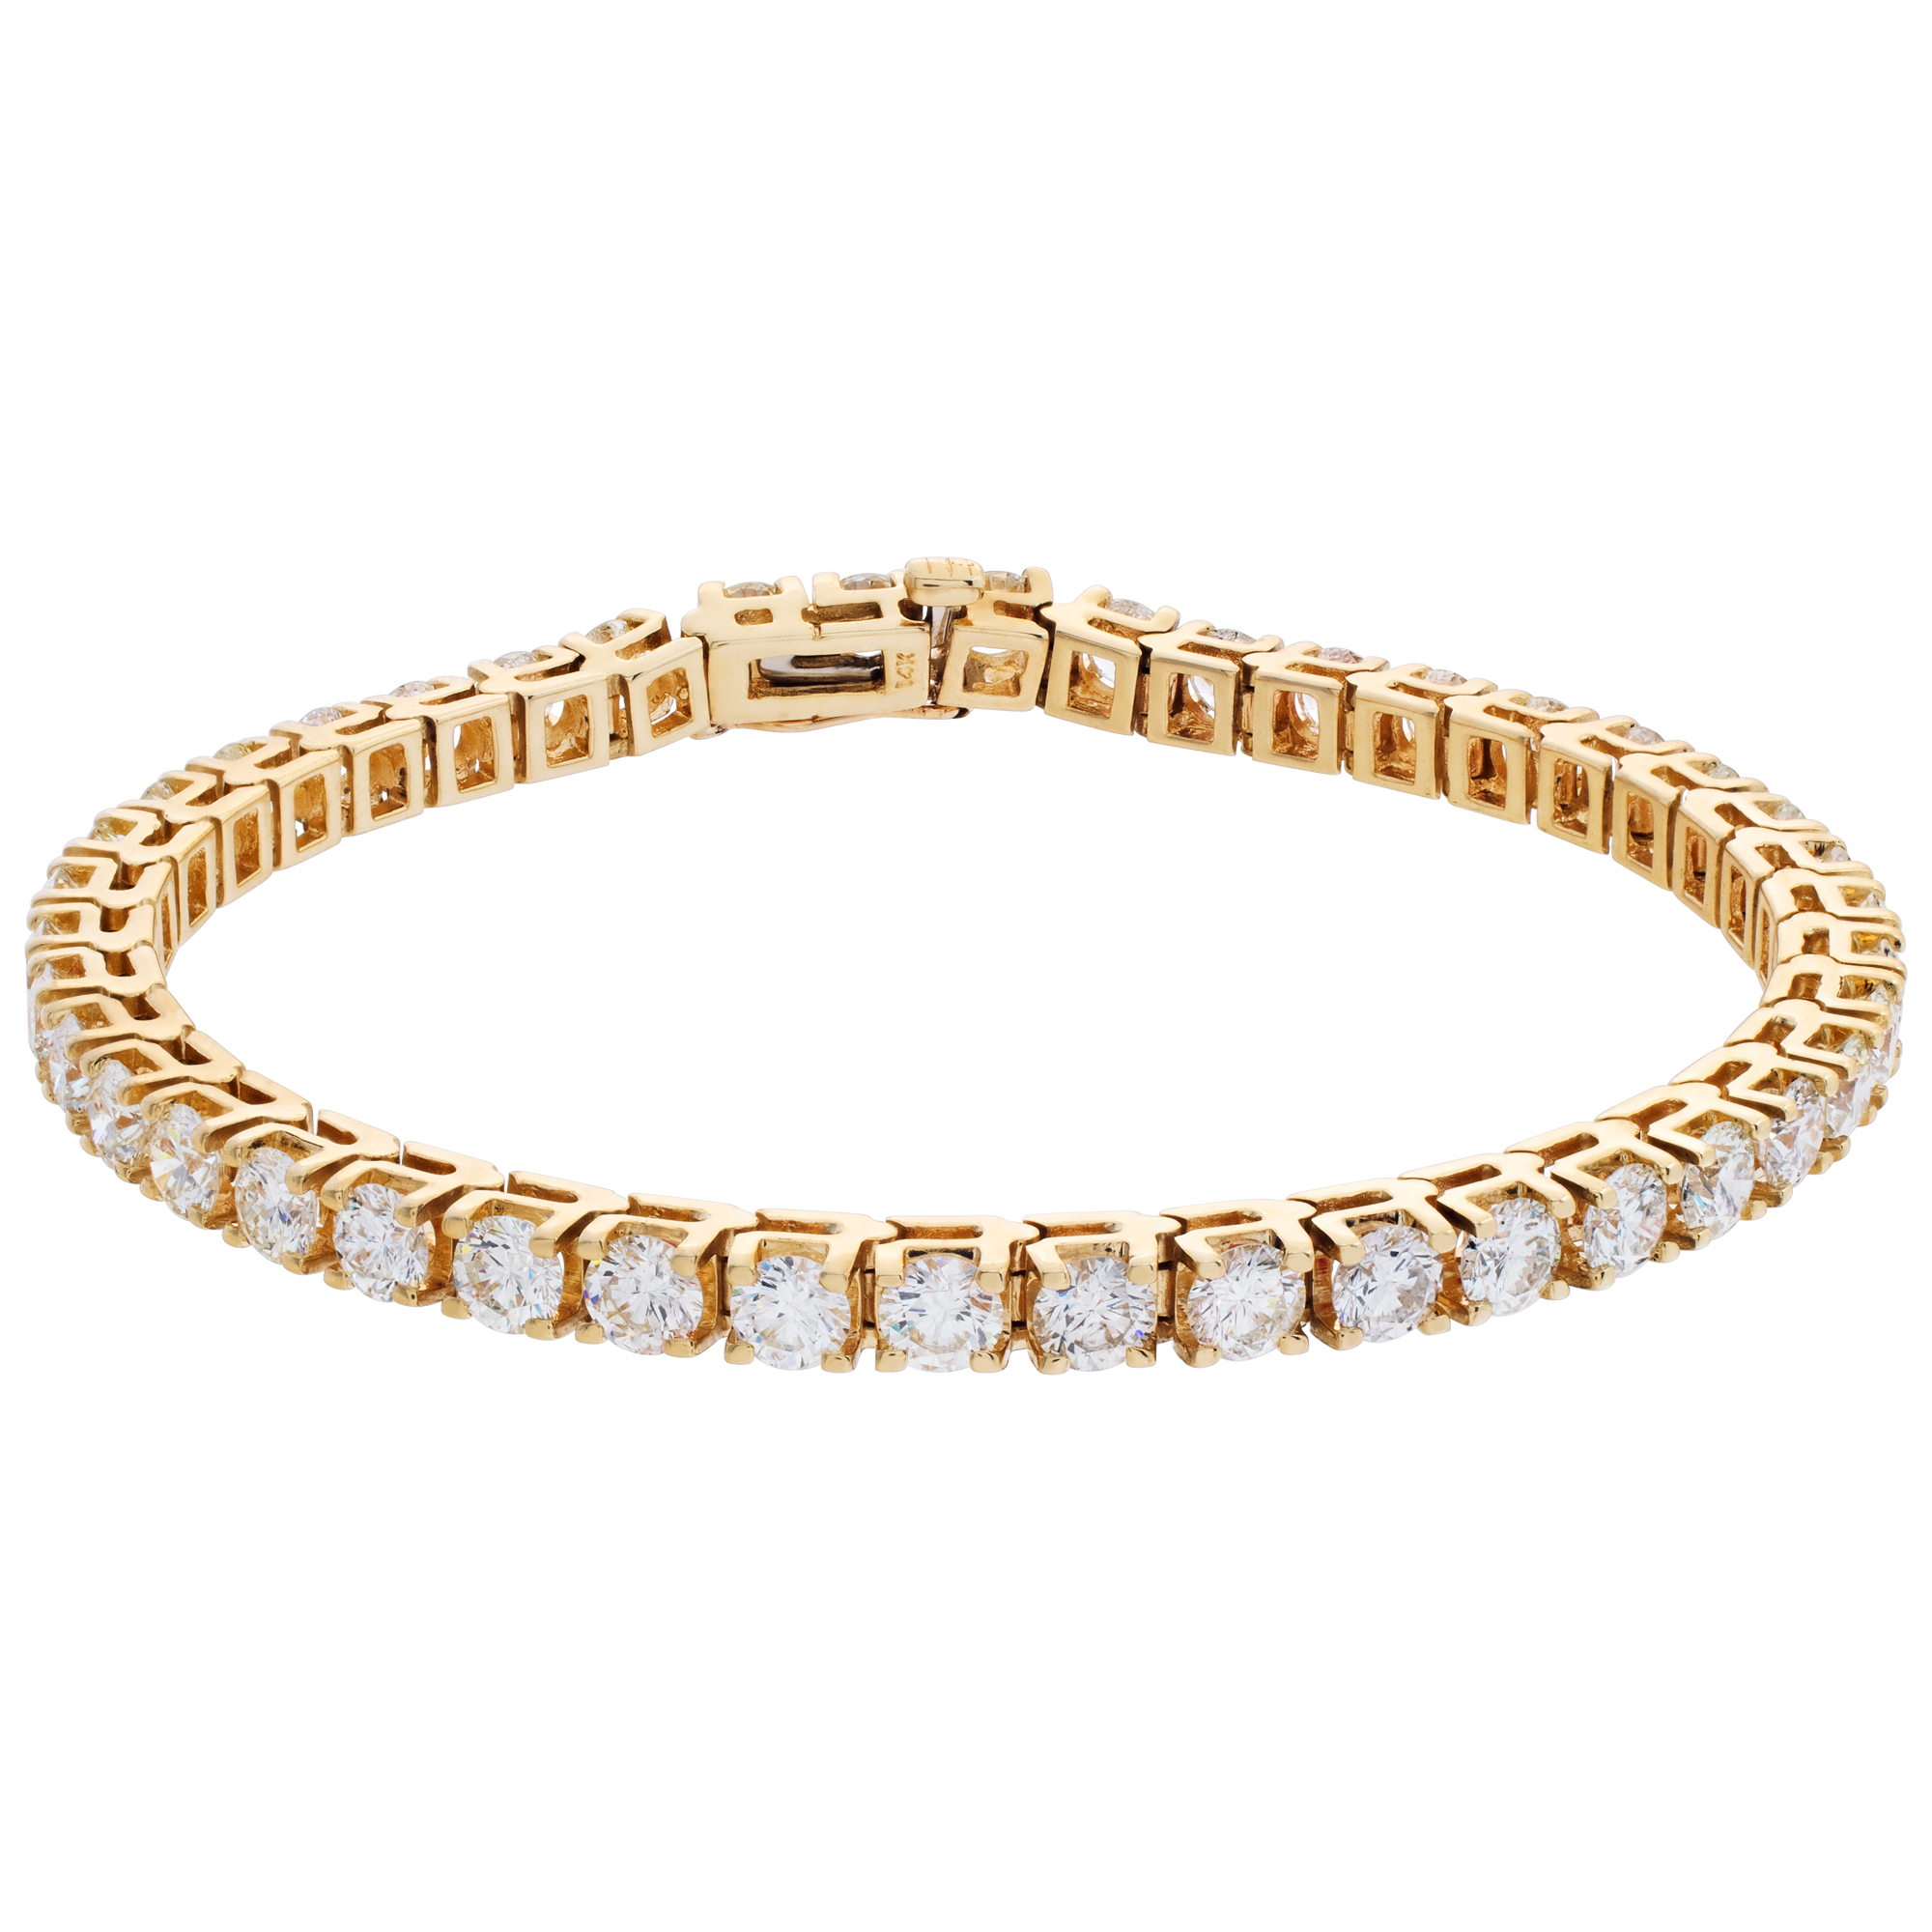 Diamonds line bracelet with approx 8 carats round brilliant cut diamonds, set in 14K yellow gold. image 1